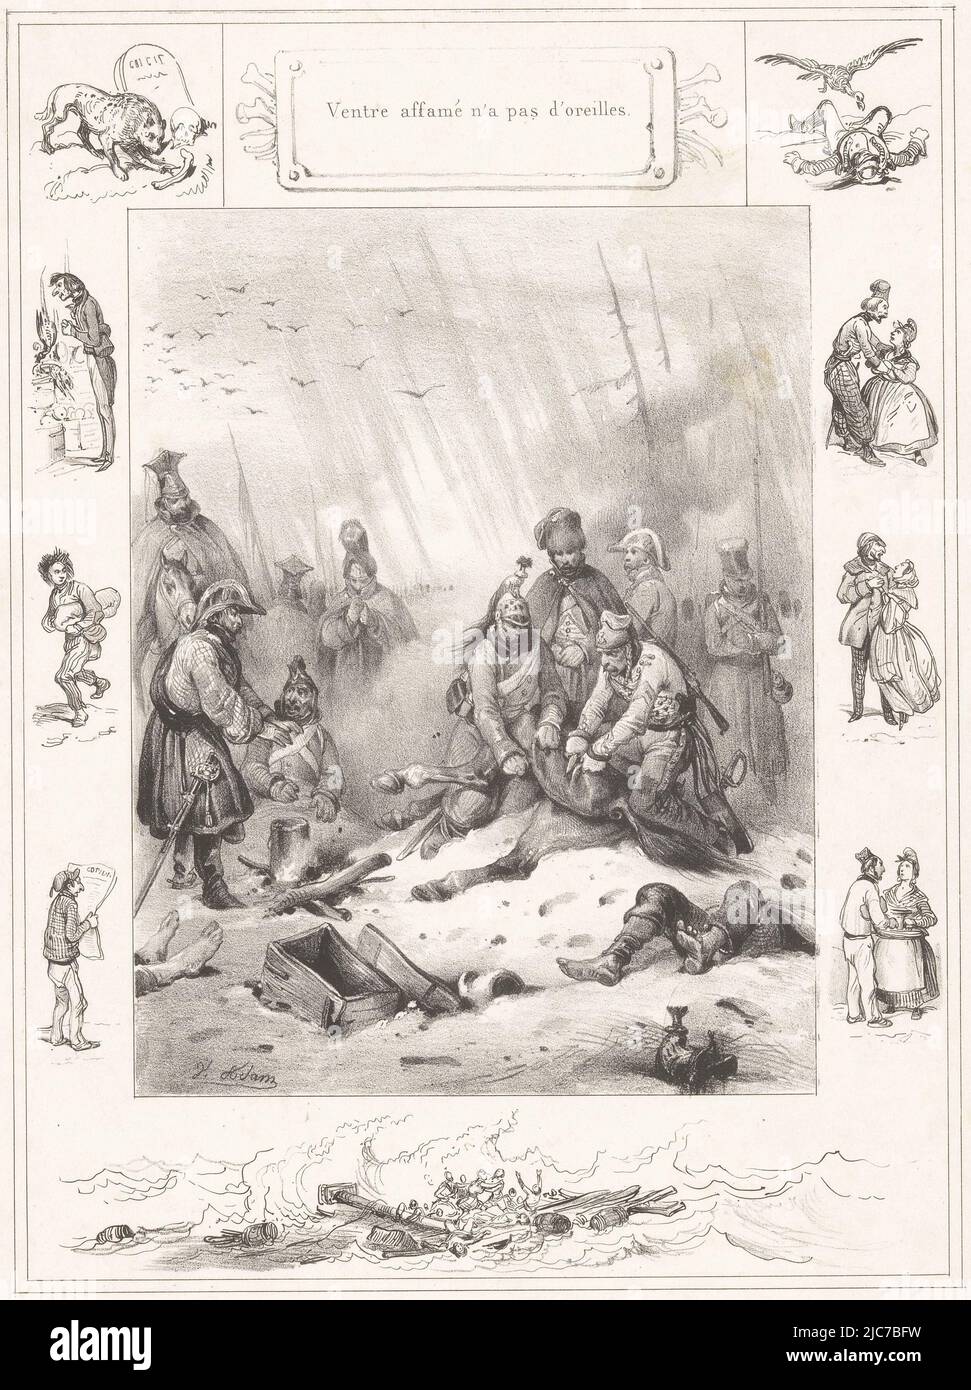 In a bleak winter landscape, hungry soldiers cut into a dead horse. In the foreground, corpses lie in the snow. Other examples of the proverb are shown in the frame around the main scene. He who is hungry is capable of anything Ventre affam, print maker: Victor Adam, (mentioned on object), printer: Benard Lemercier & Cie, (mentioned on object), publisher: Eugène Bulla & Eugène Jouy, (mentioned on object), Paris, 1840, paper, h 353 mm × w 267 mm Stock Photo